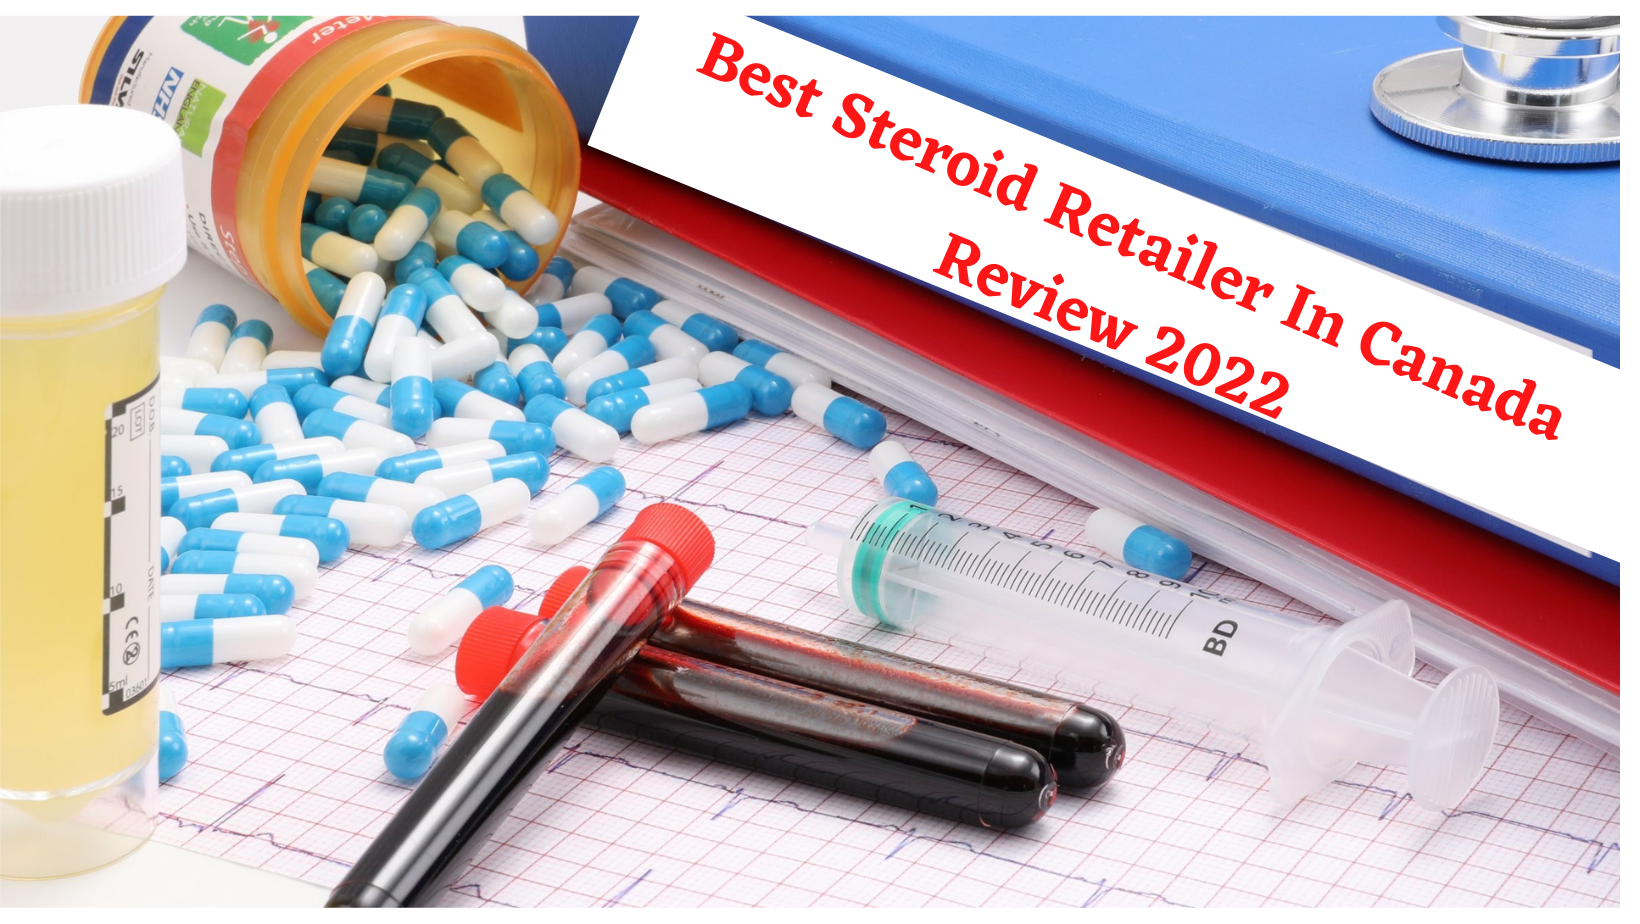 Best Steroid Retailer In Canada Review 2022